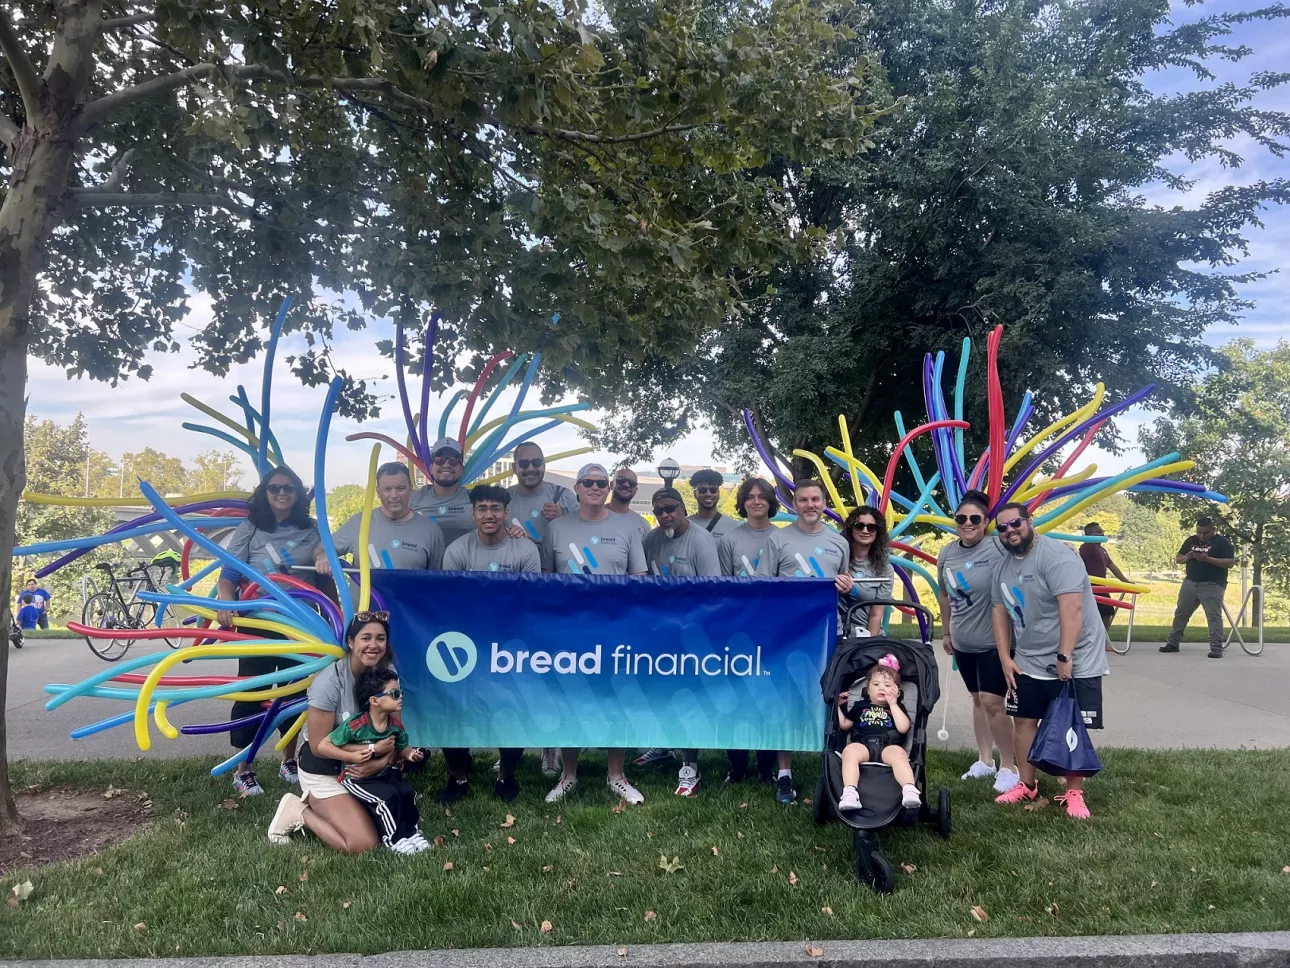 Group photo with Bread Financial sign after a parade. 